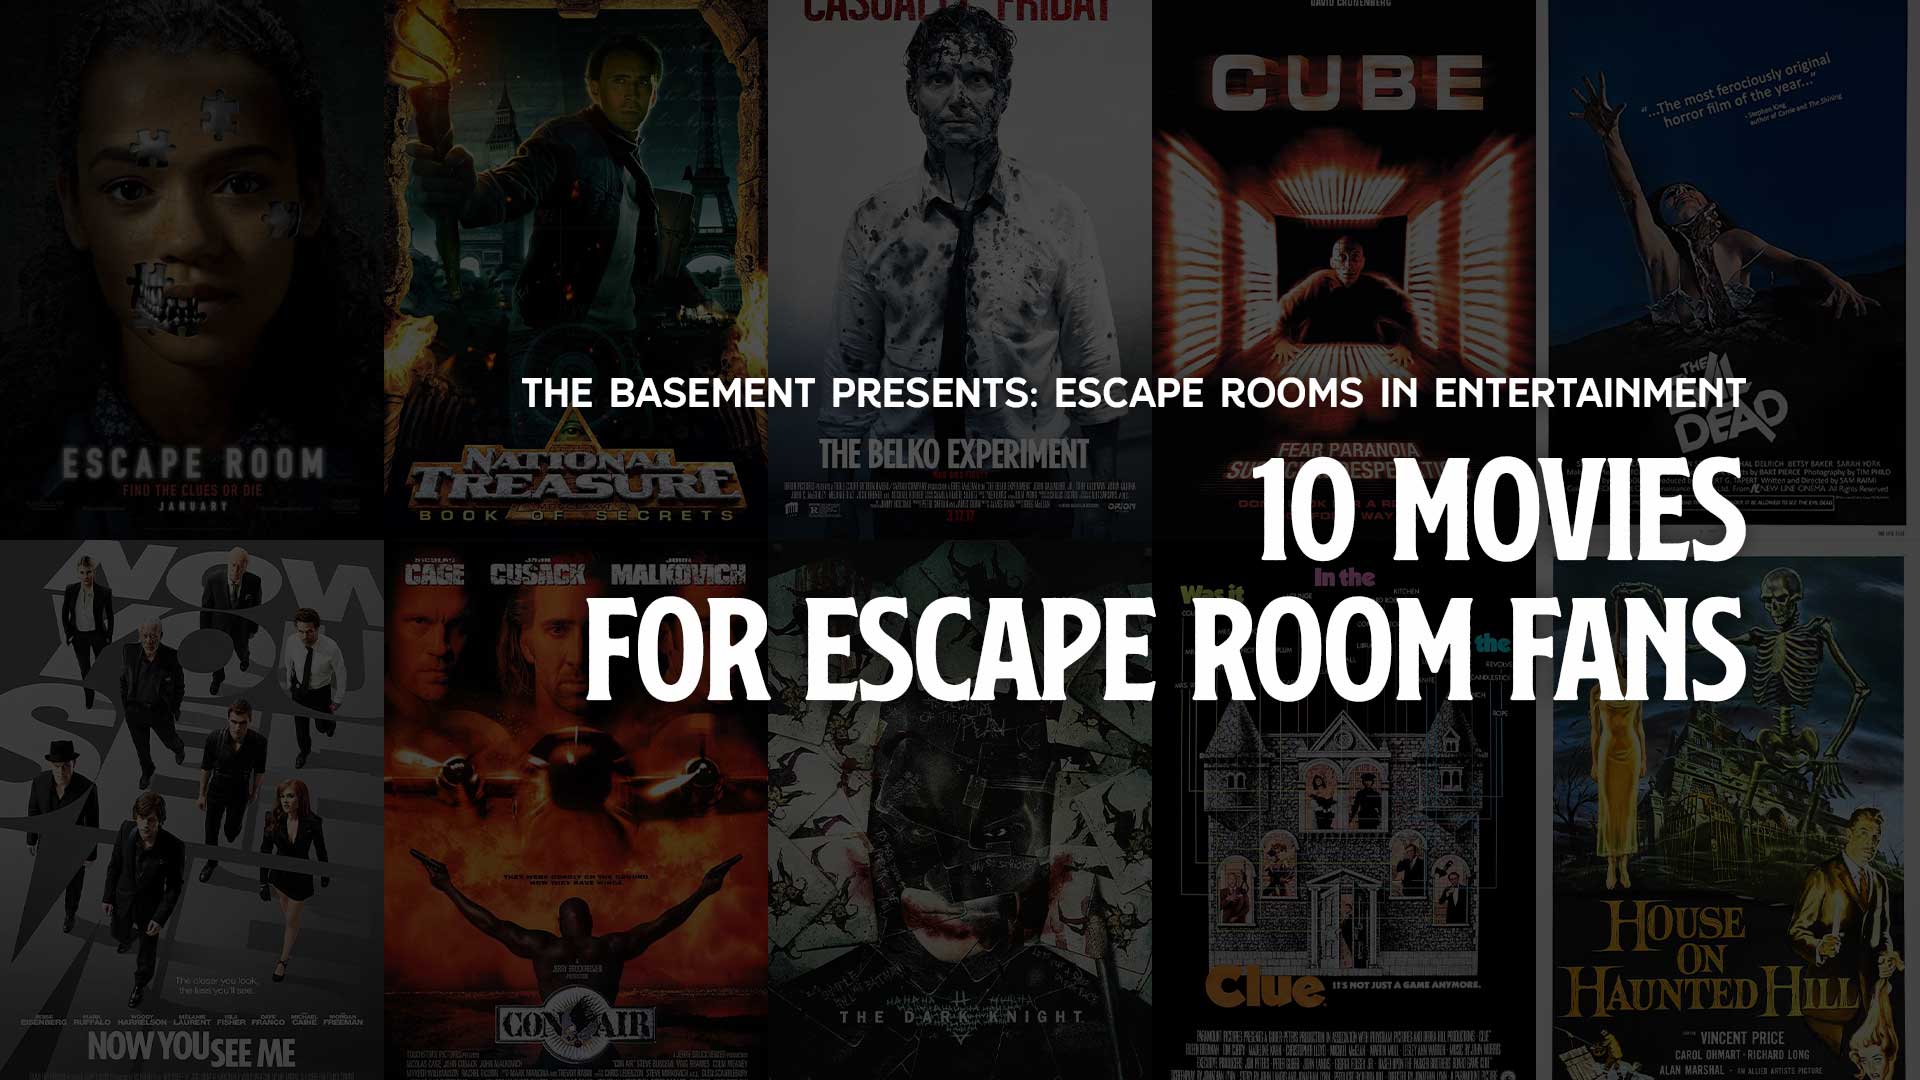 10 Movies for Escape Room Fans